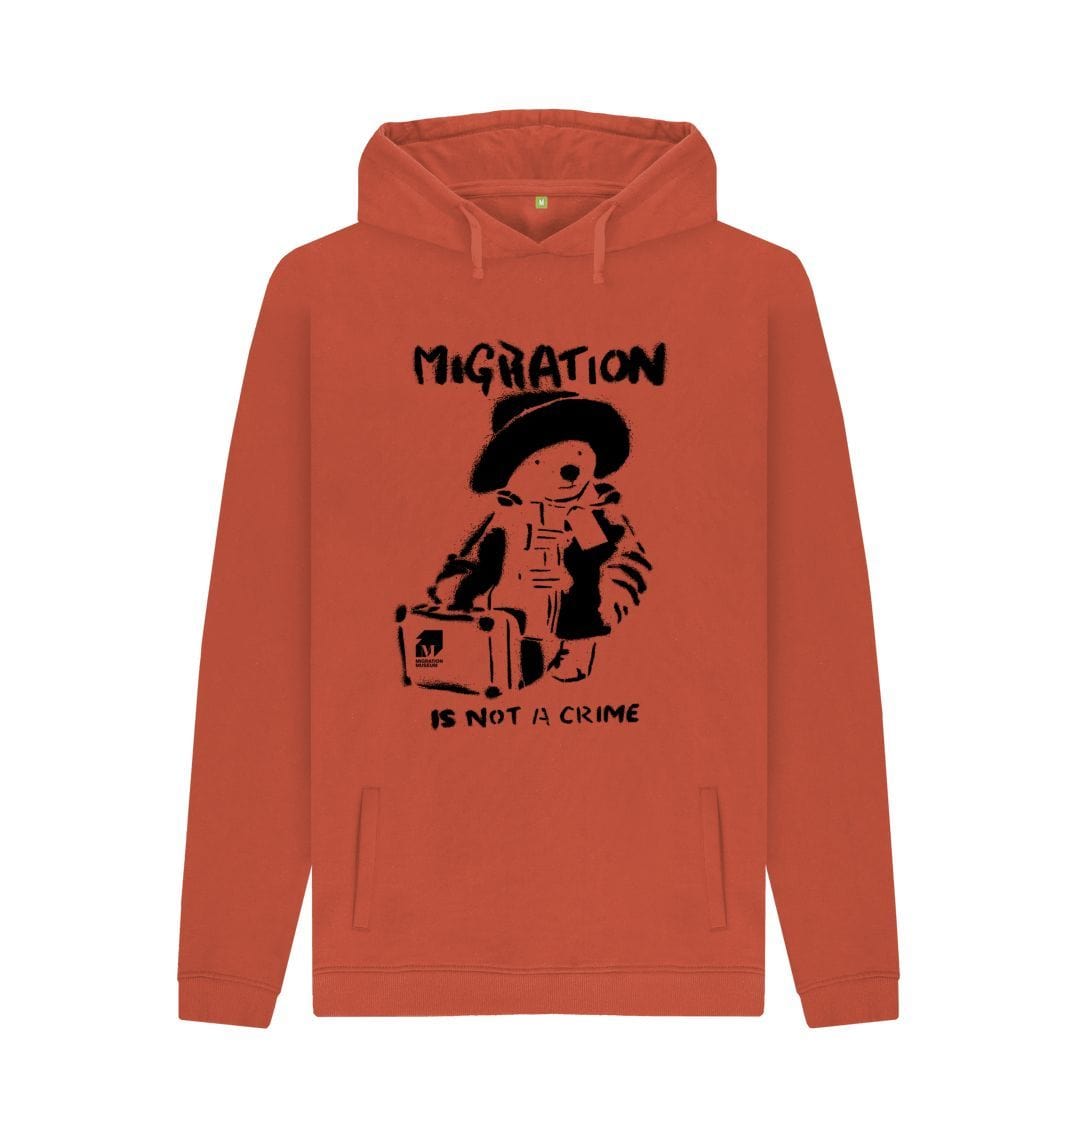 Rust Migration Is Not A Crime - Unisex Organic Hoodie